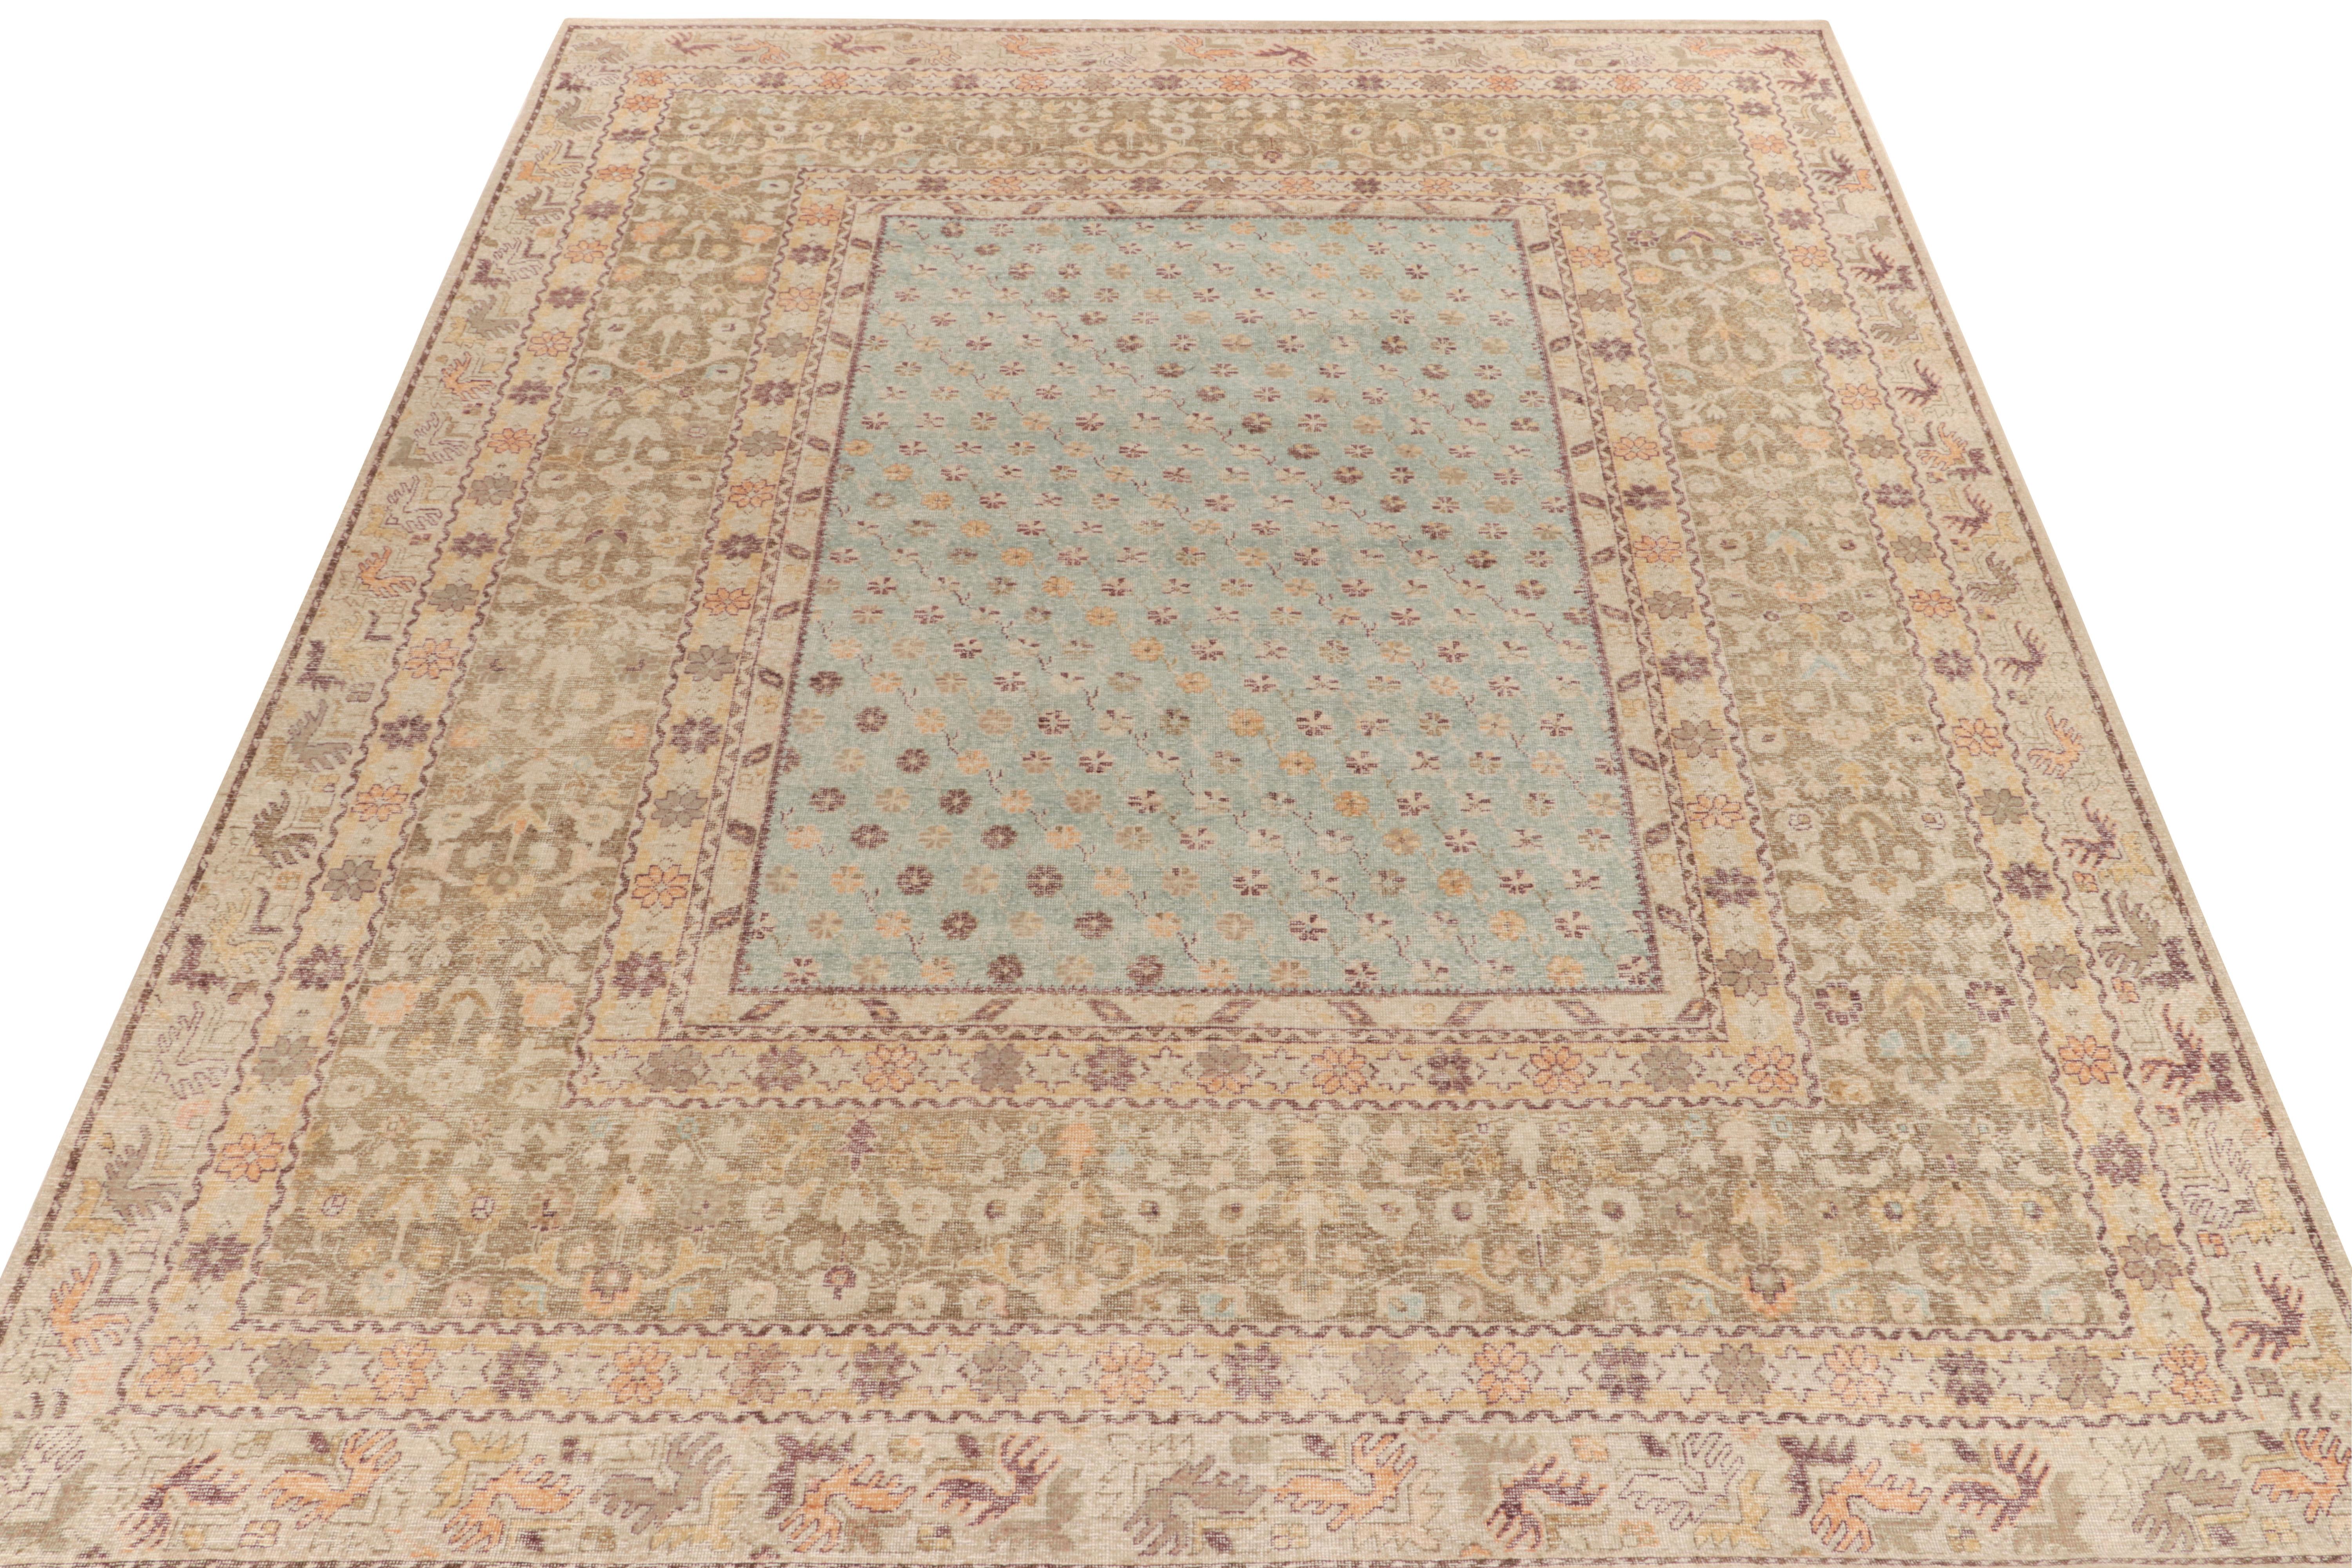 A 12x15 distressed style rug from Rug & Kilim’s coveted Homage Collection, enjoying an artful hand-knotted wool in low-pile shabby-chic texture. Inspired by tribal kilim styles, this carpet relishes gentle tones of blue, beige, brown, purple & gold